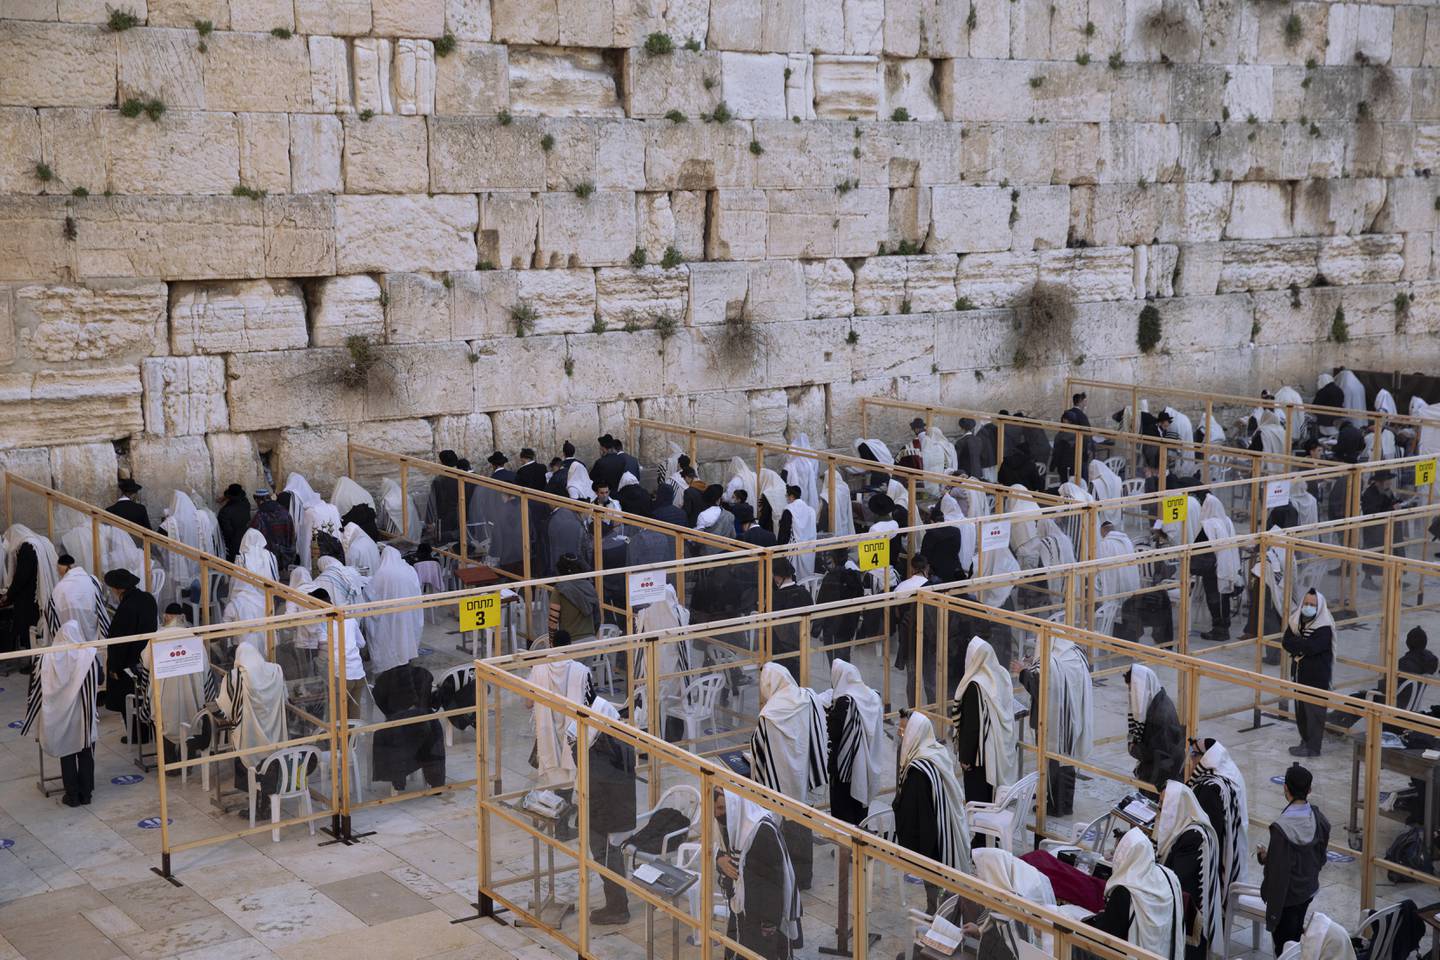 Ultra-Orthodox Jewish men pray in a divided section of the Western Wall, the holiest site where Jews can pray, in accordance with  government's measures to help stop the spread of the coronavirus, in Jerusalem's Old City, Monday, Feb. 8, 2021. (AP Photo/Oded Balilty)